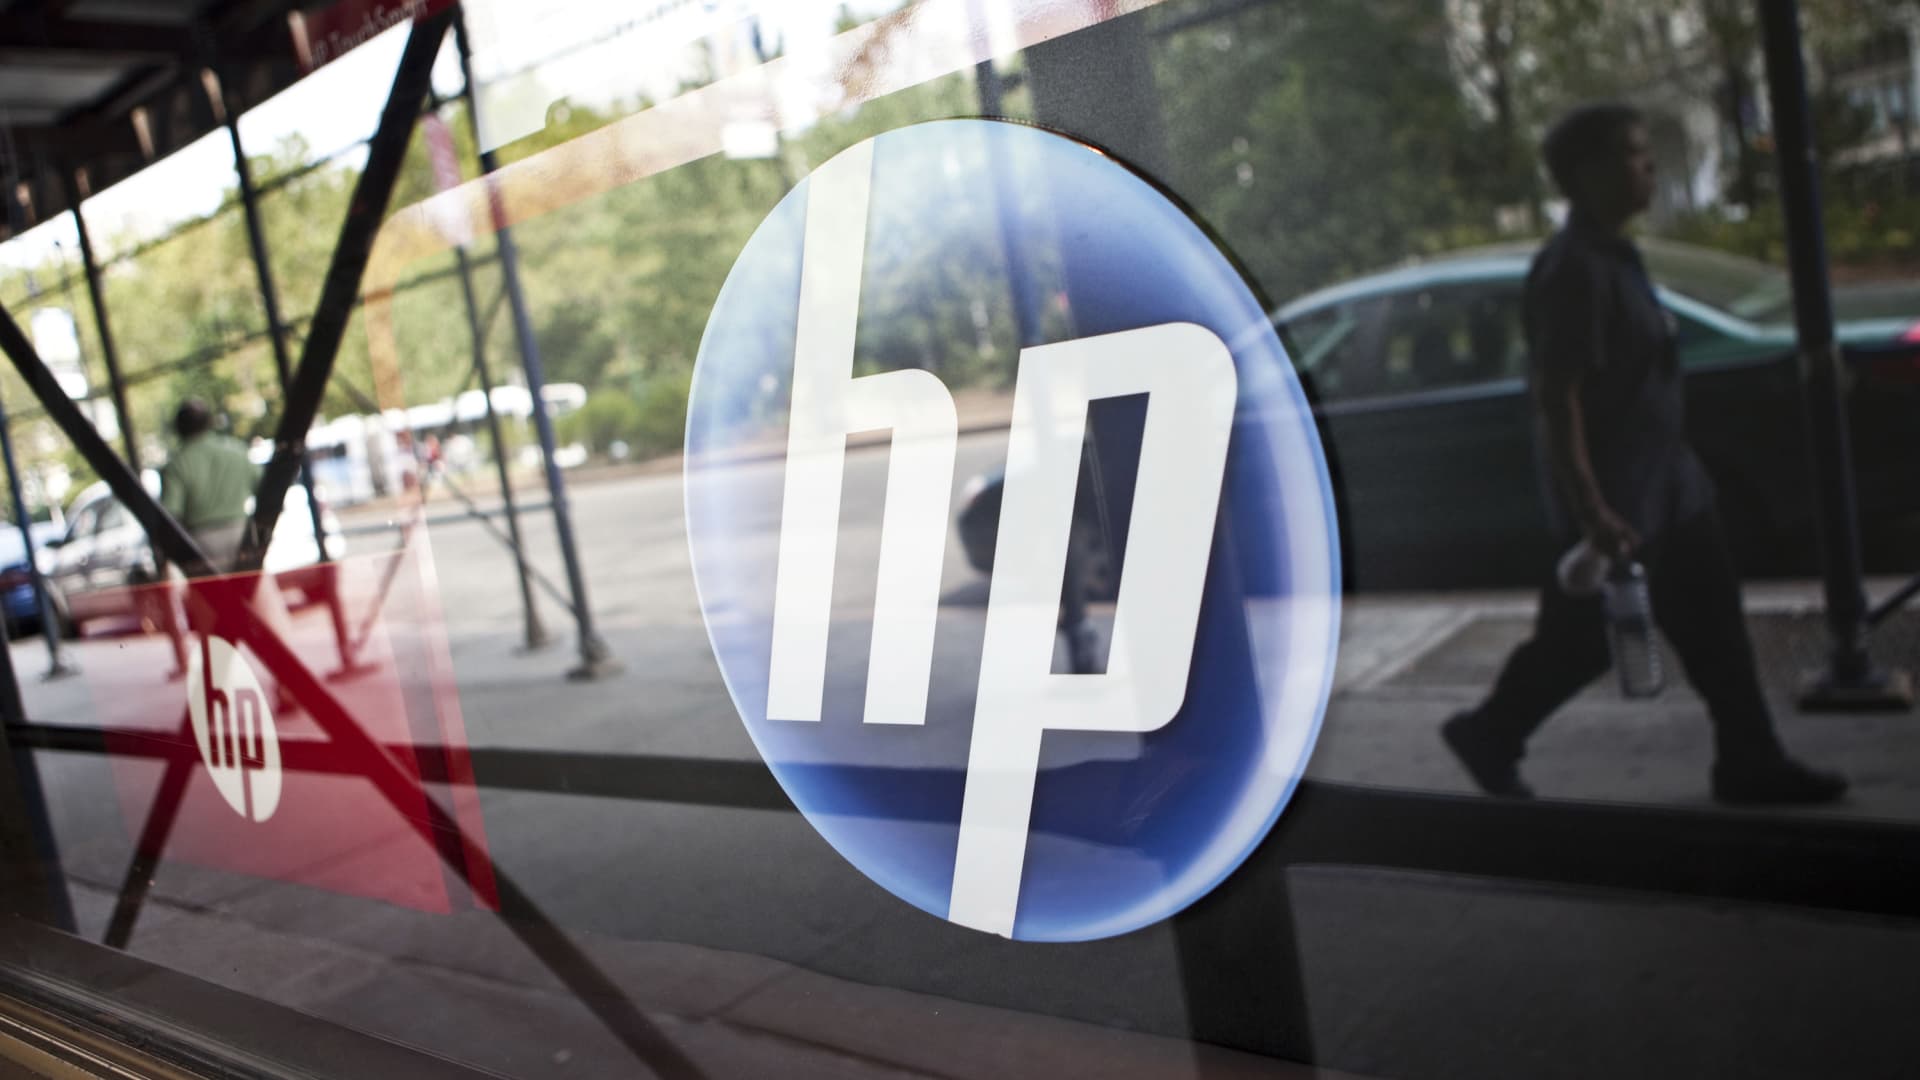 The Hewlett-Packard Co. logo is displayed on the window of an electronics store in New York.